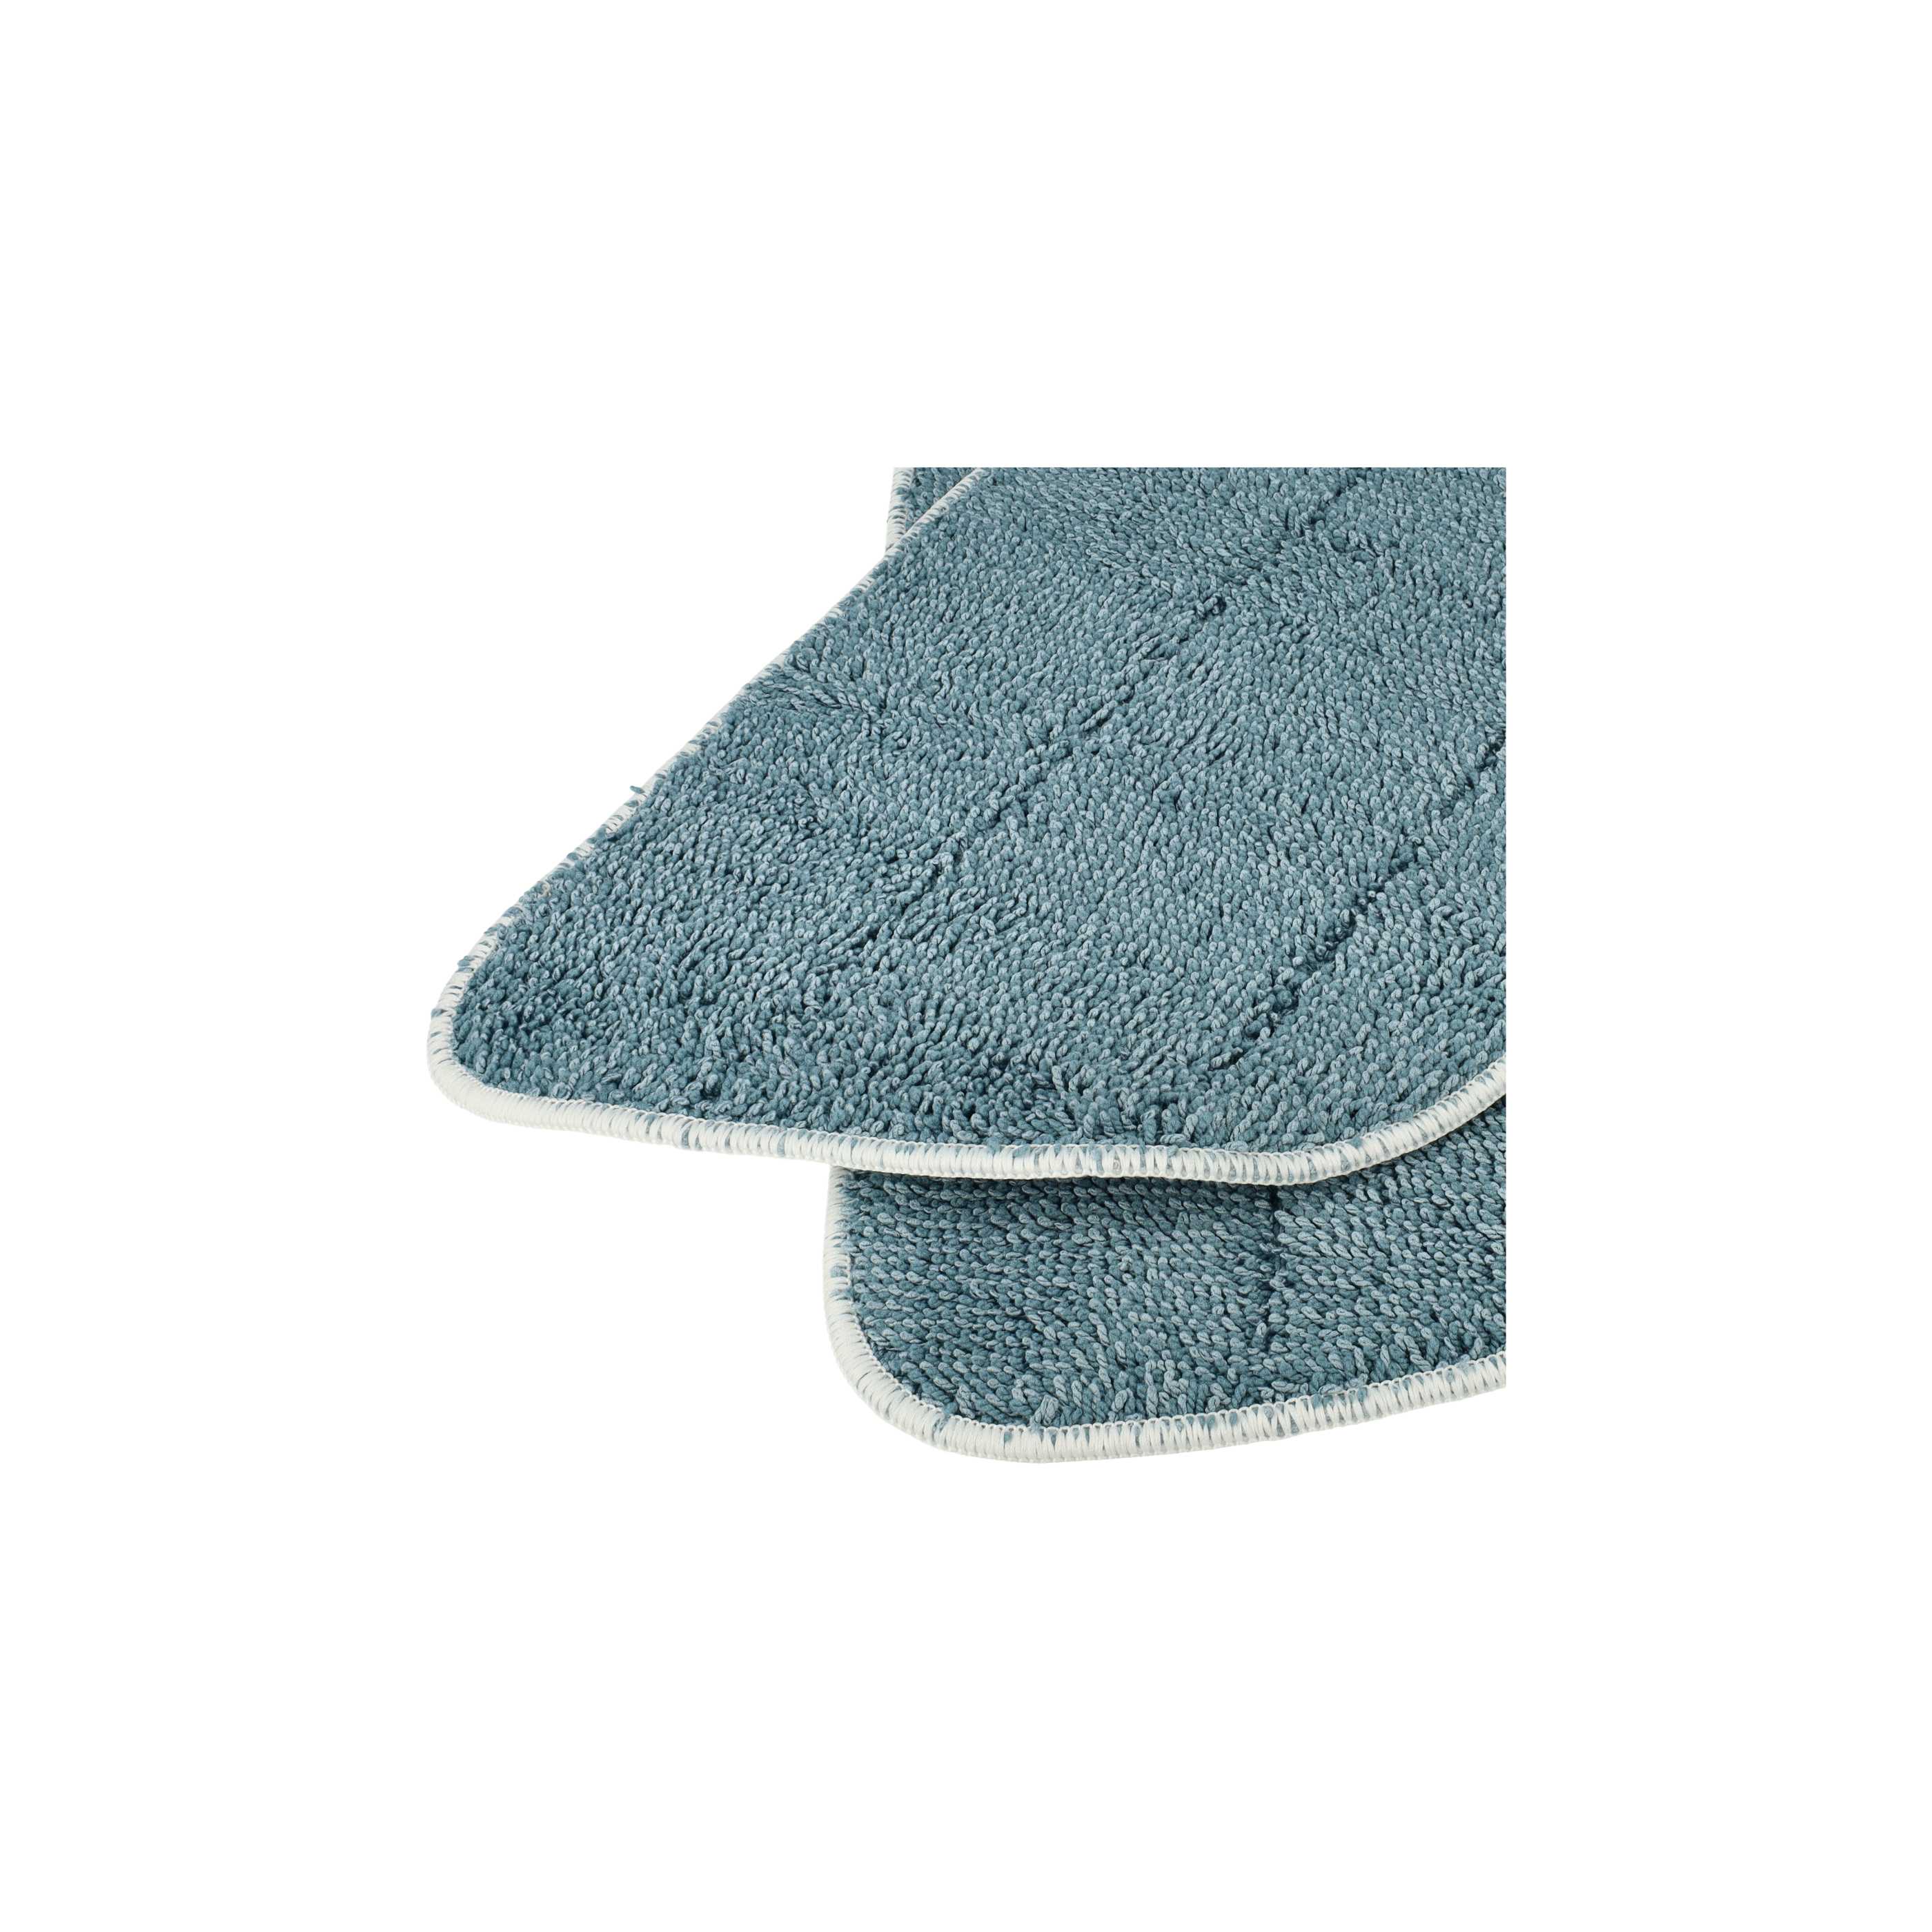 4x Cleaning Pad replaces Leifheit 11941 for LeifheitHot Spray Steamer, Steam Mop - Microfibre grey-blue